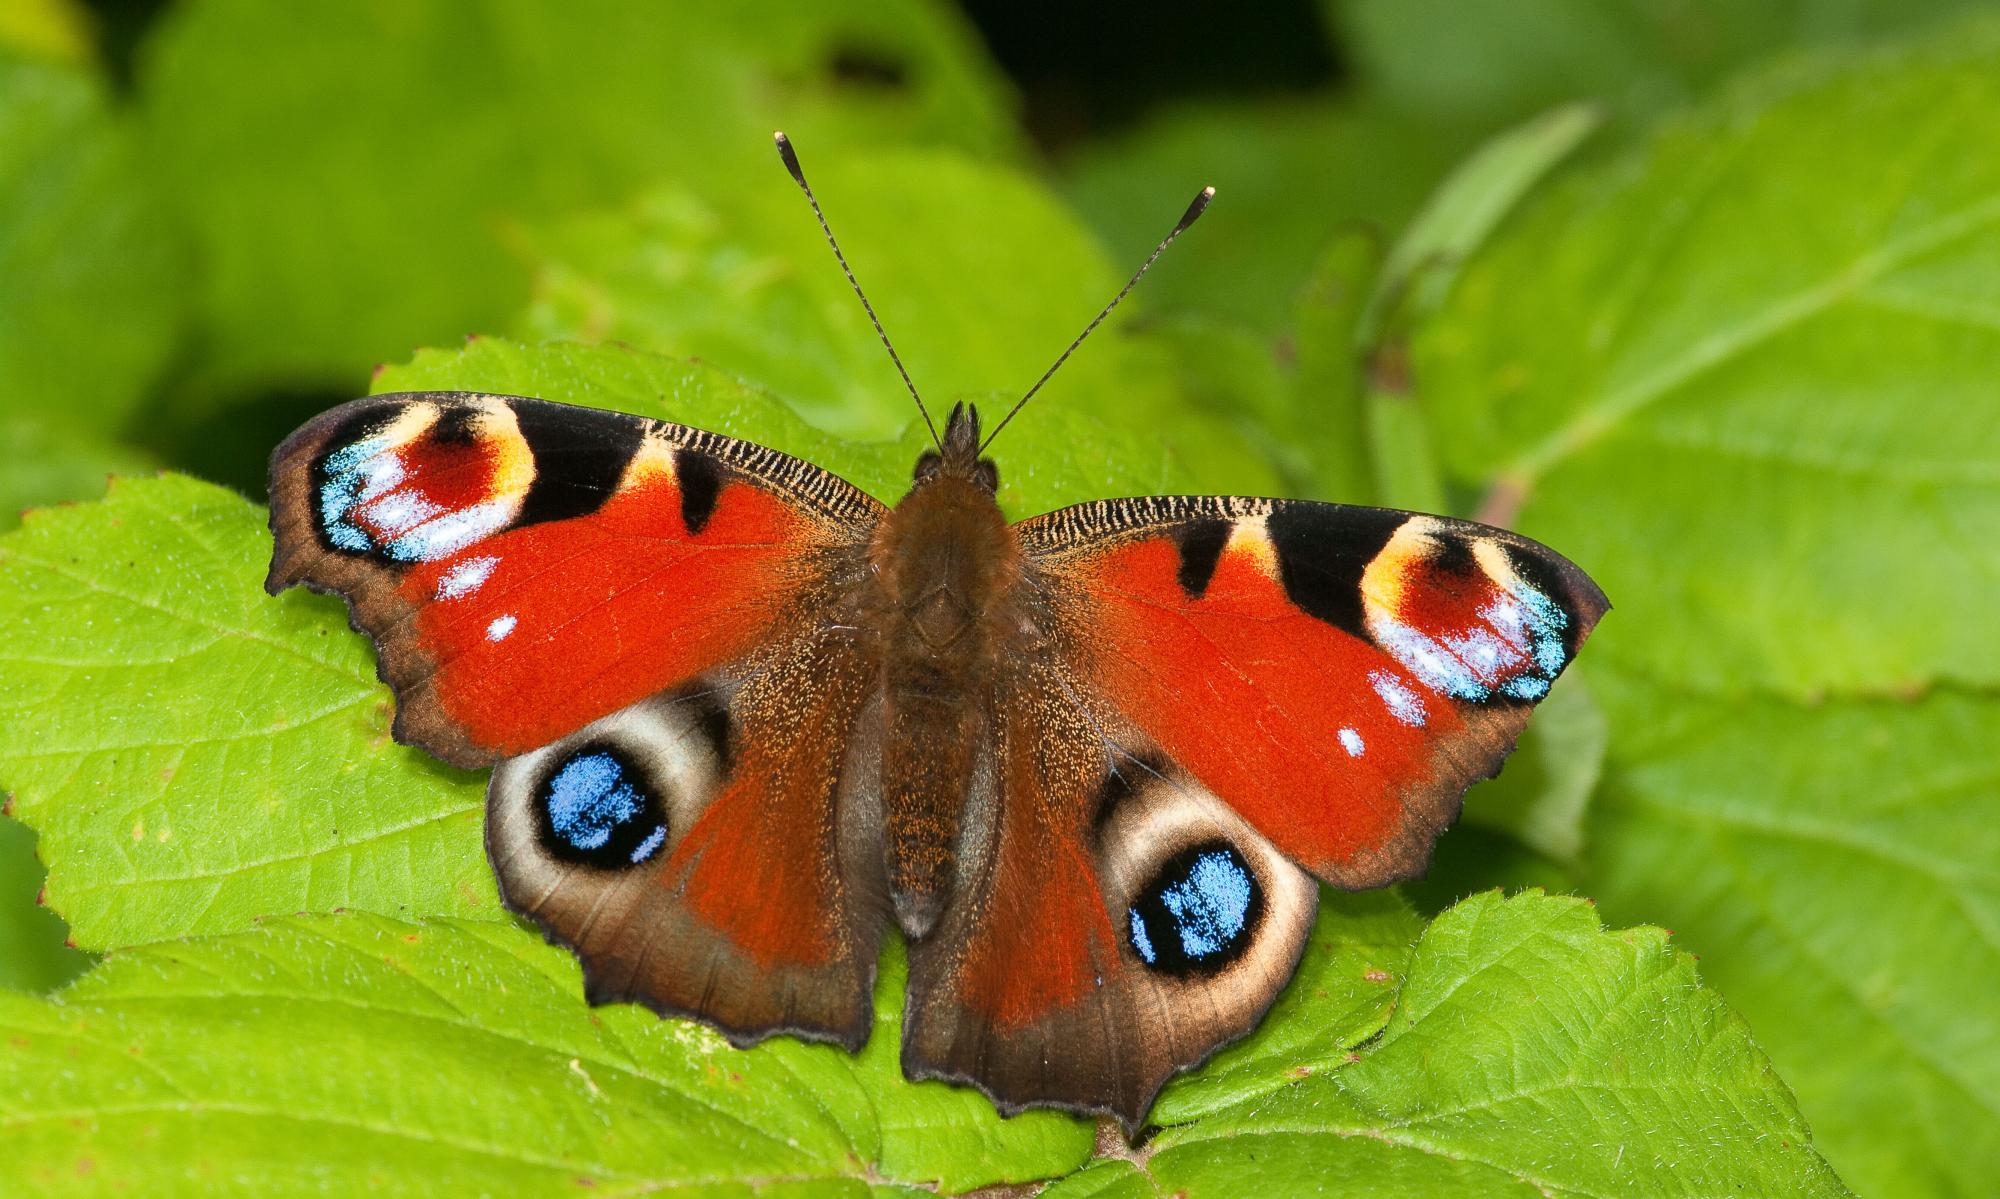 Record low number of British butterflies baffles scientists